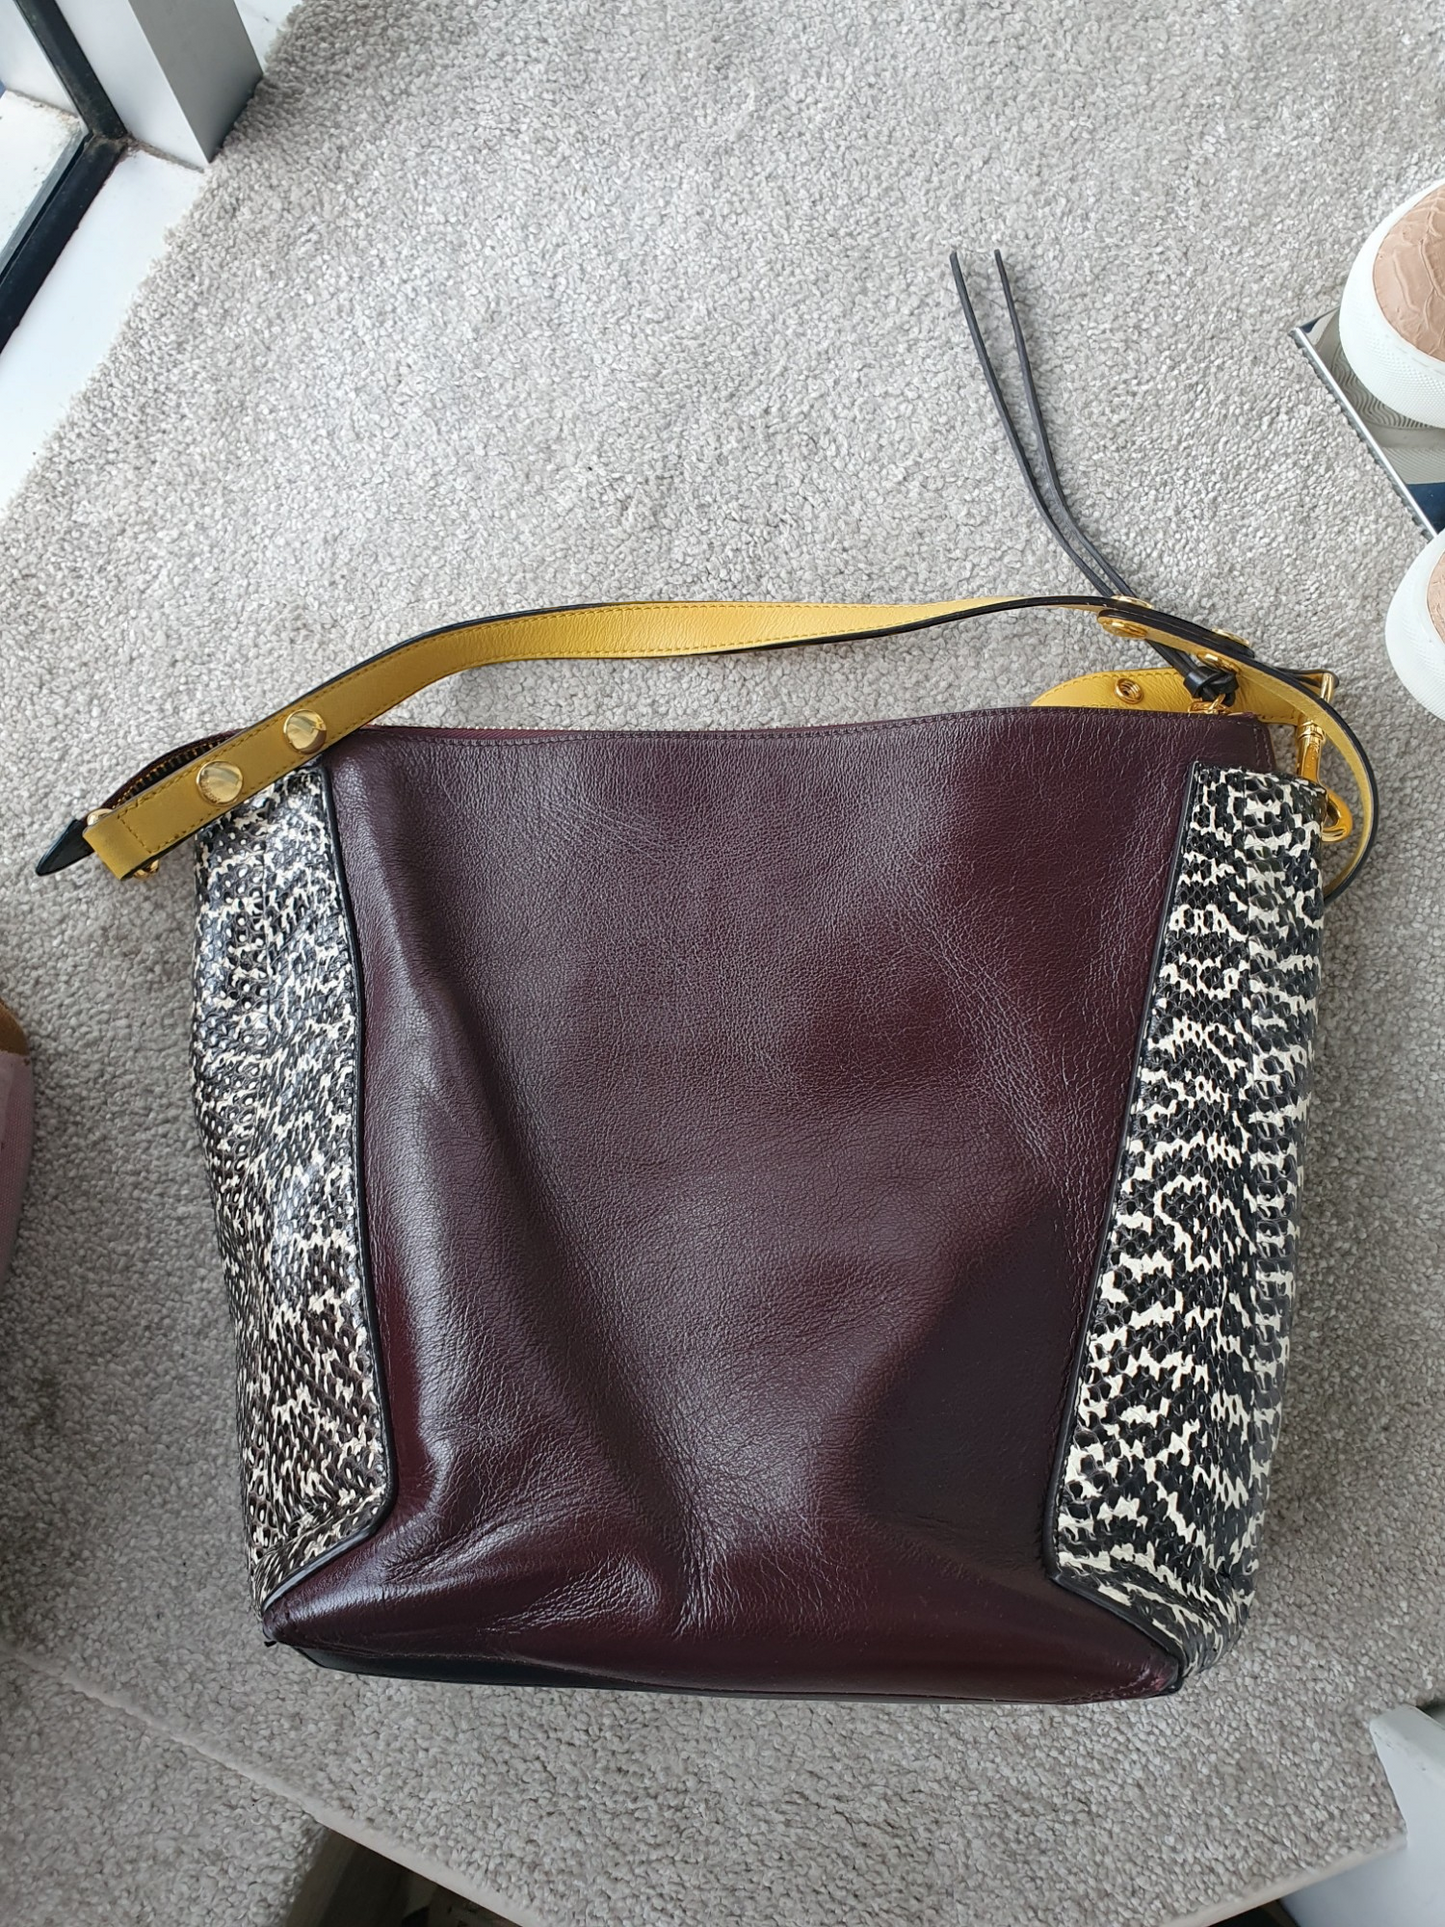 Mulberry Camden Tote Bag, in Oxblood and black